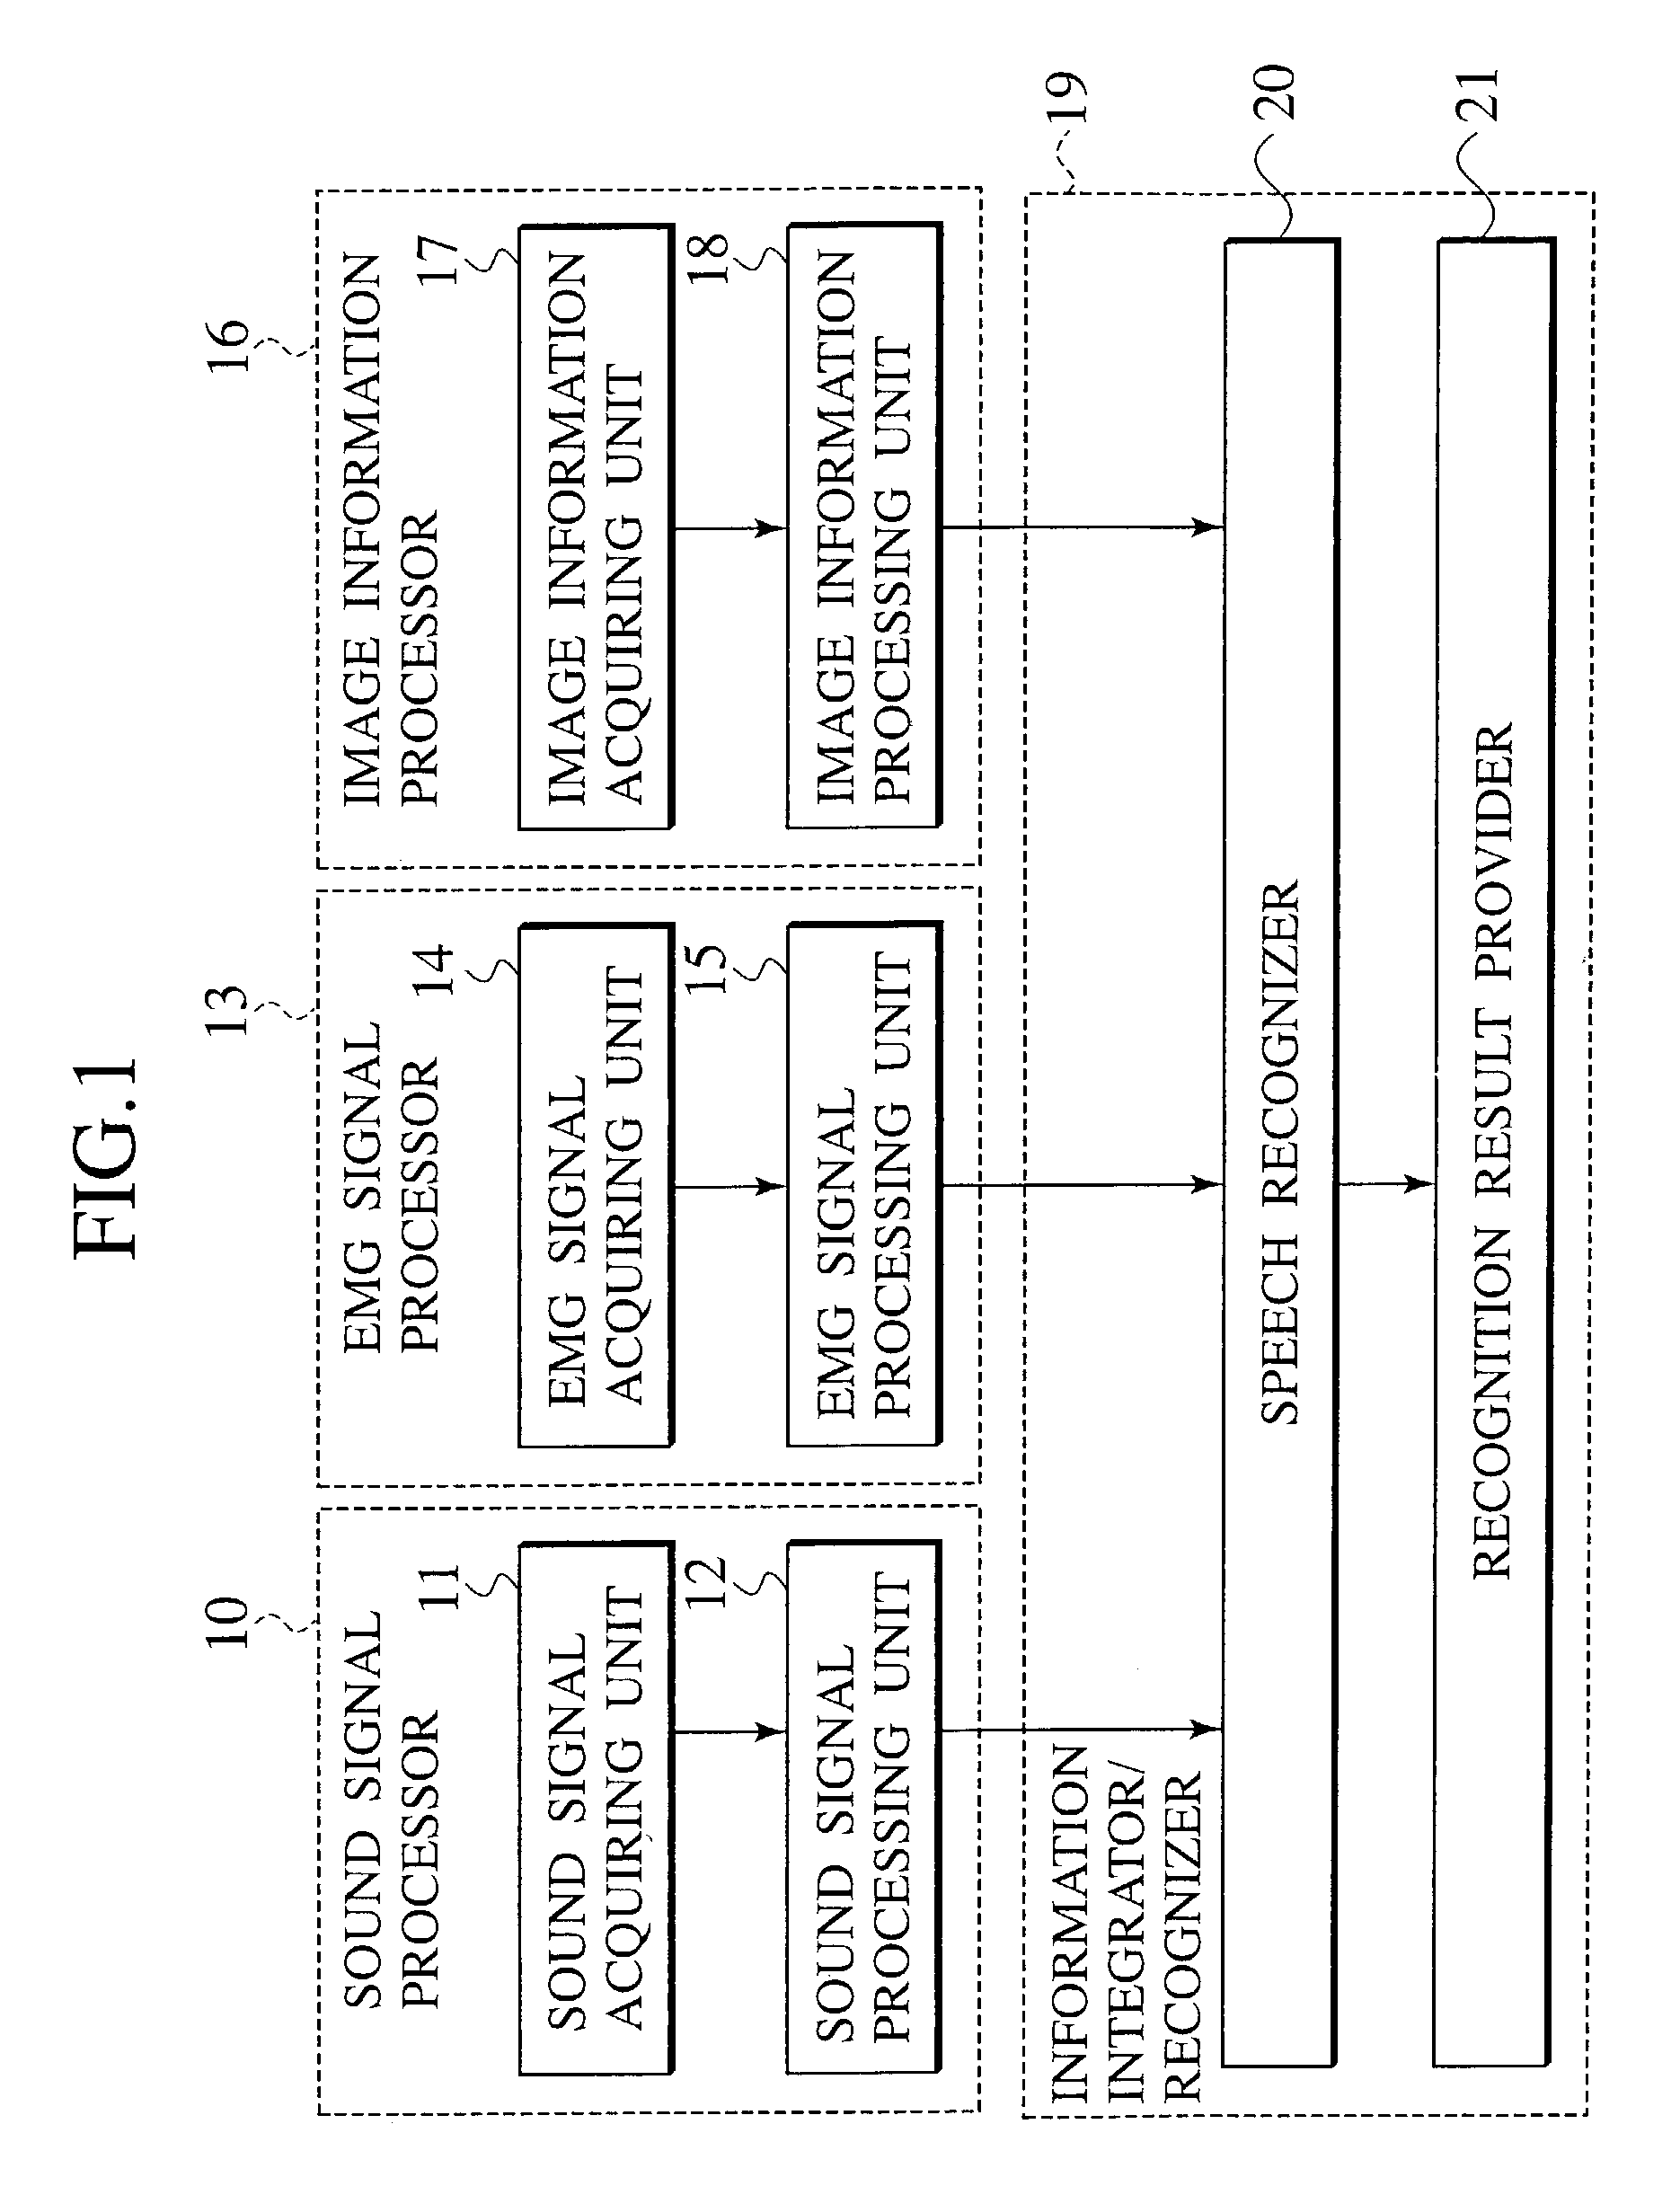 Speech recognition system, speech recognition method, speech synthesis system, speech synthesis method, and program product having increased accuracy